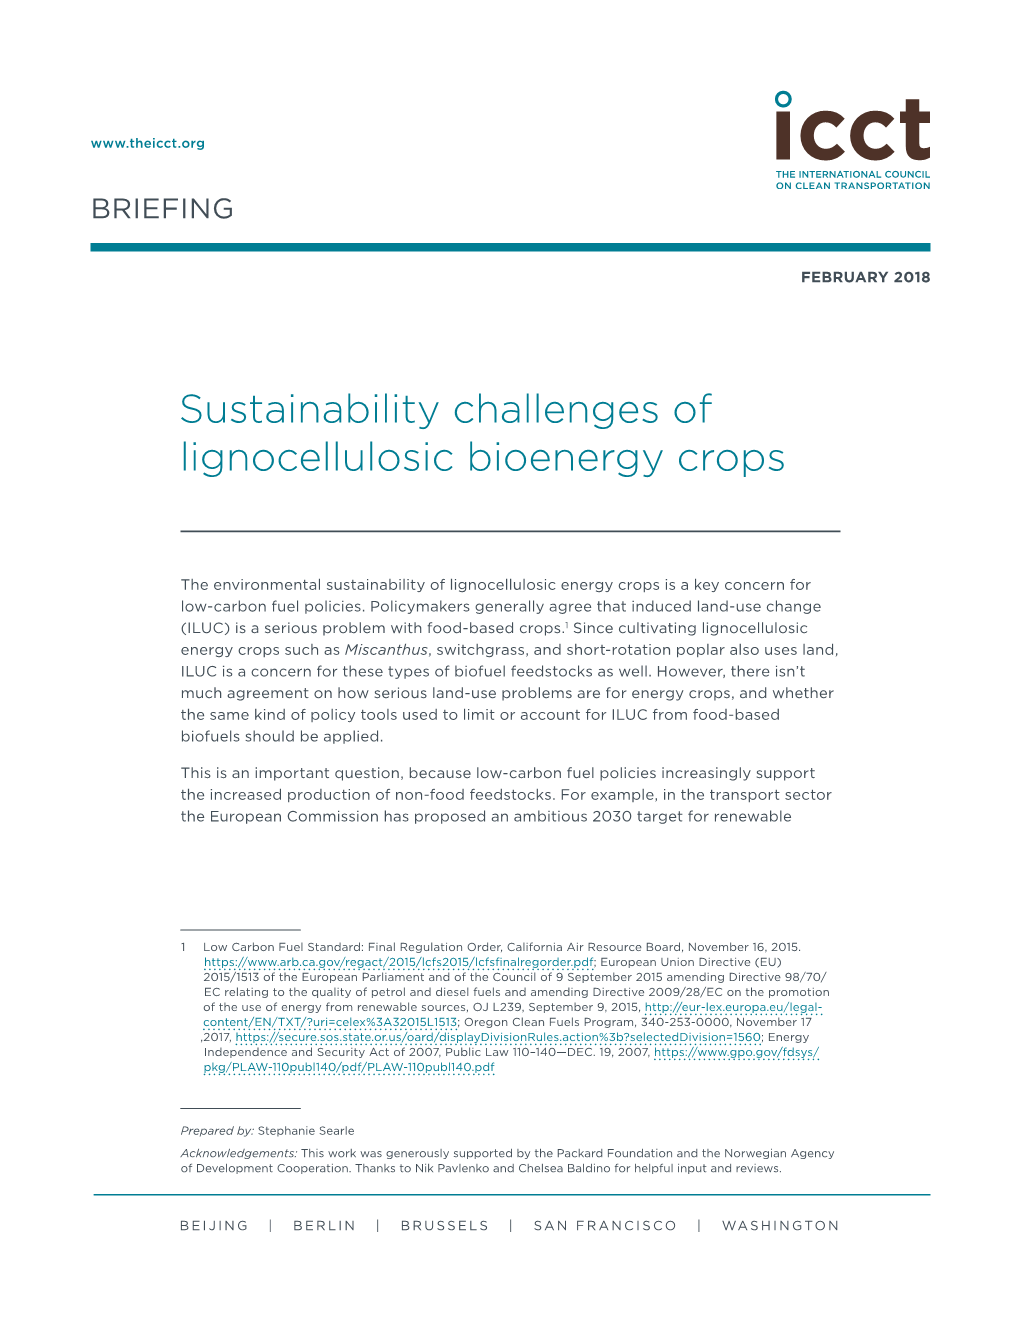 Sustainability Challenges of Lignocellulosic Bioenergy Crops